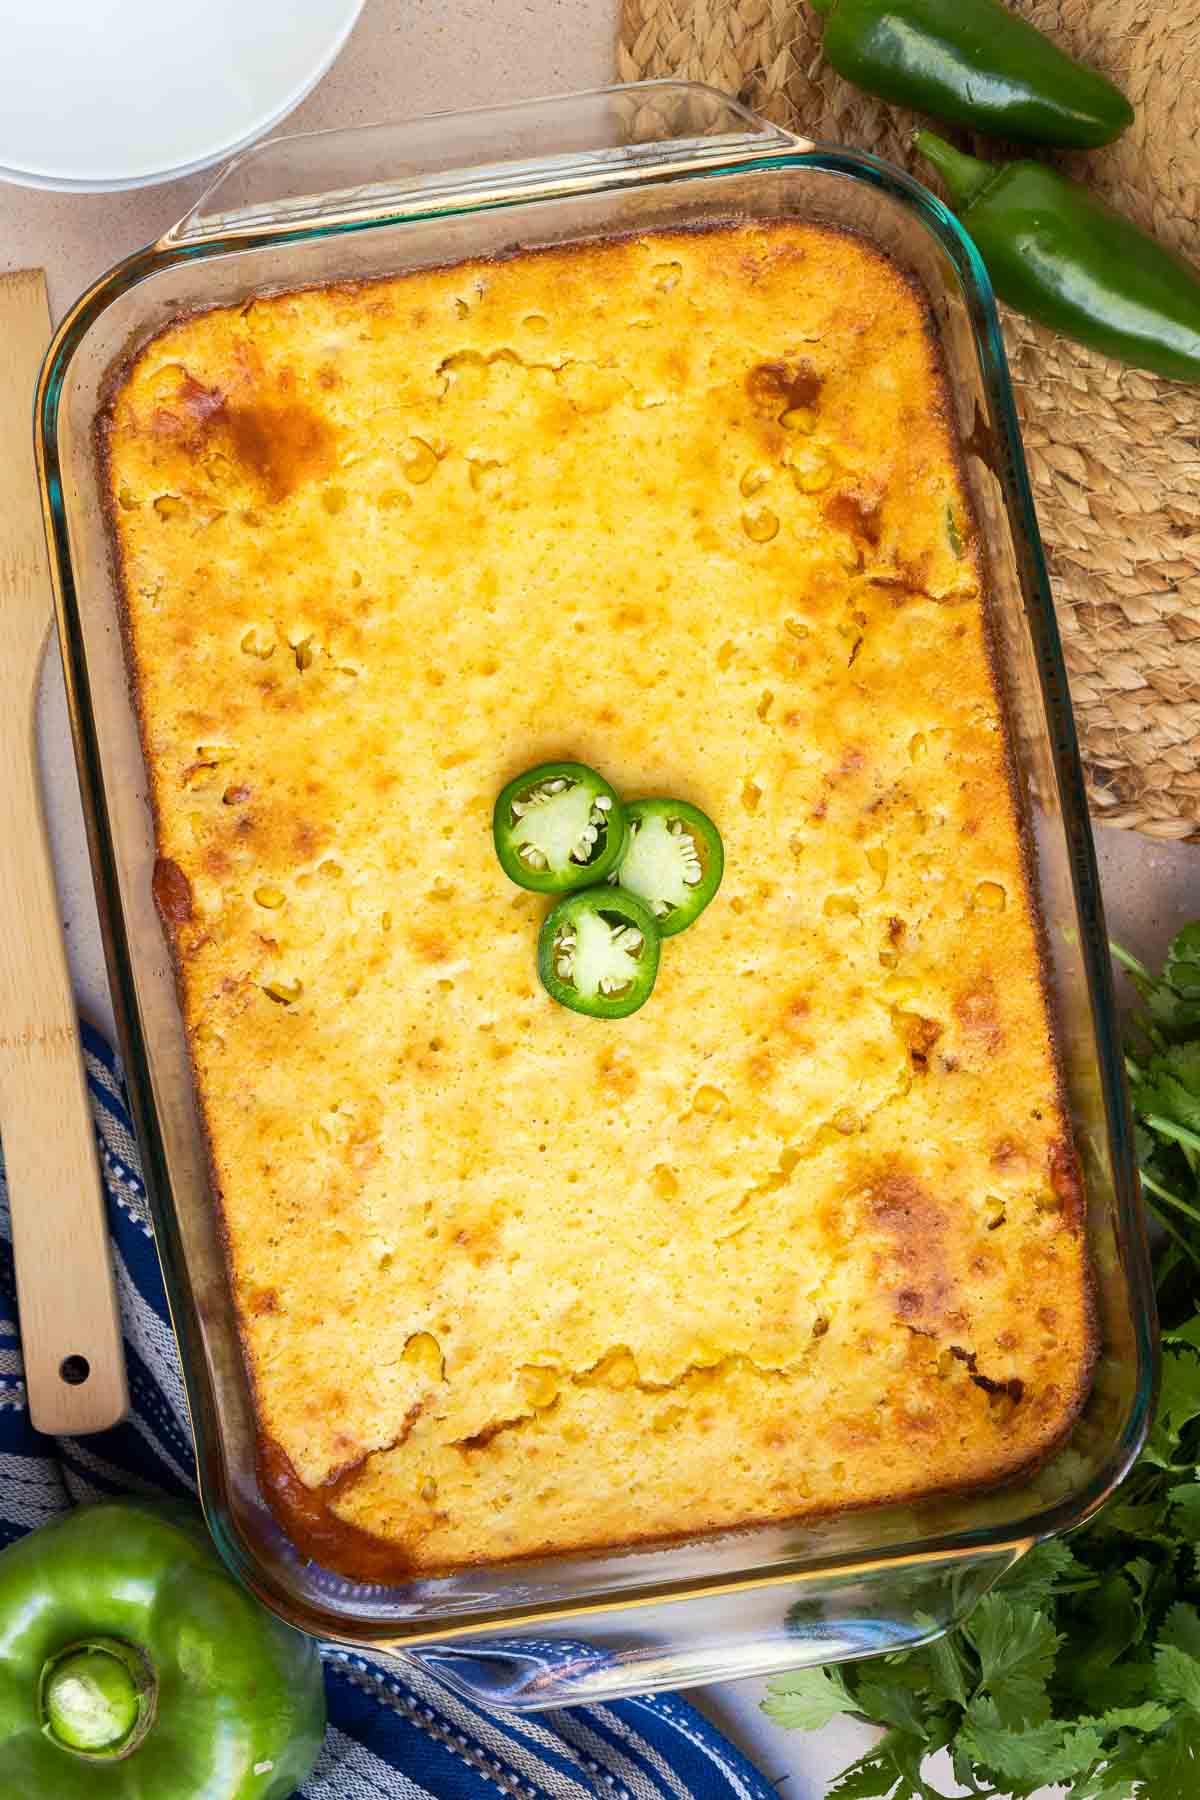 Chili cornbread casserole baked until golden brown and topped with fresh jalapeño.